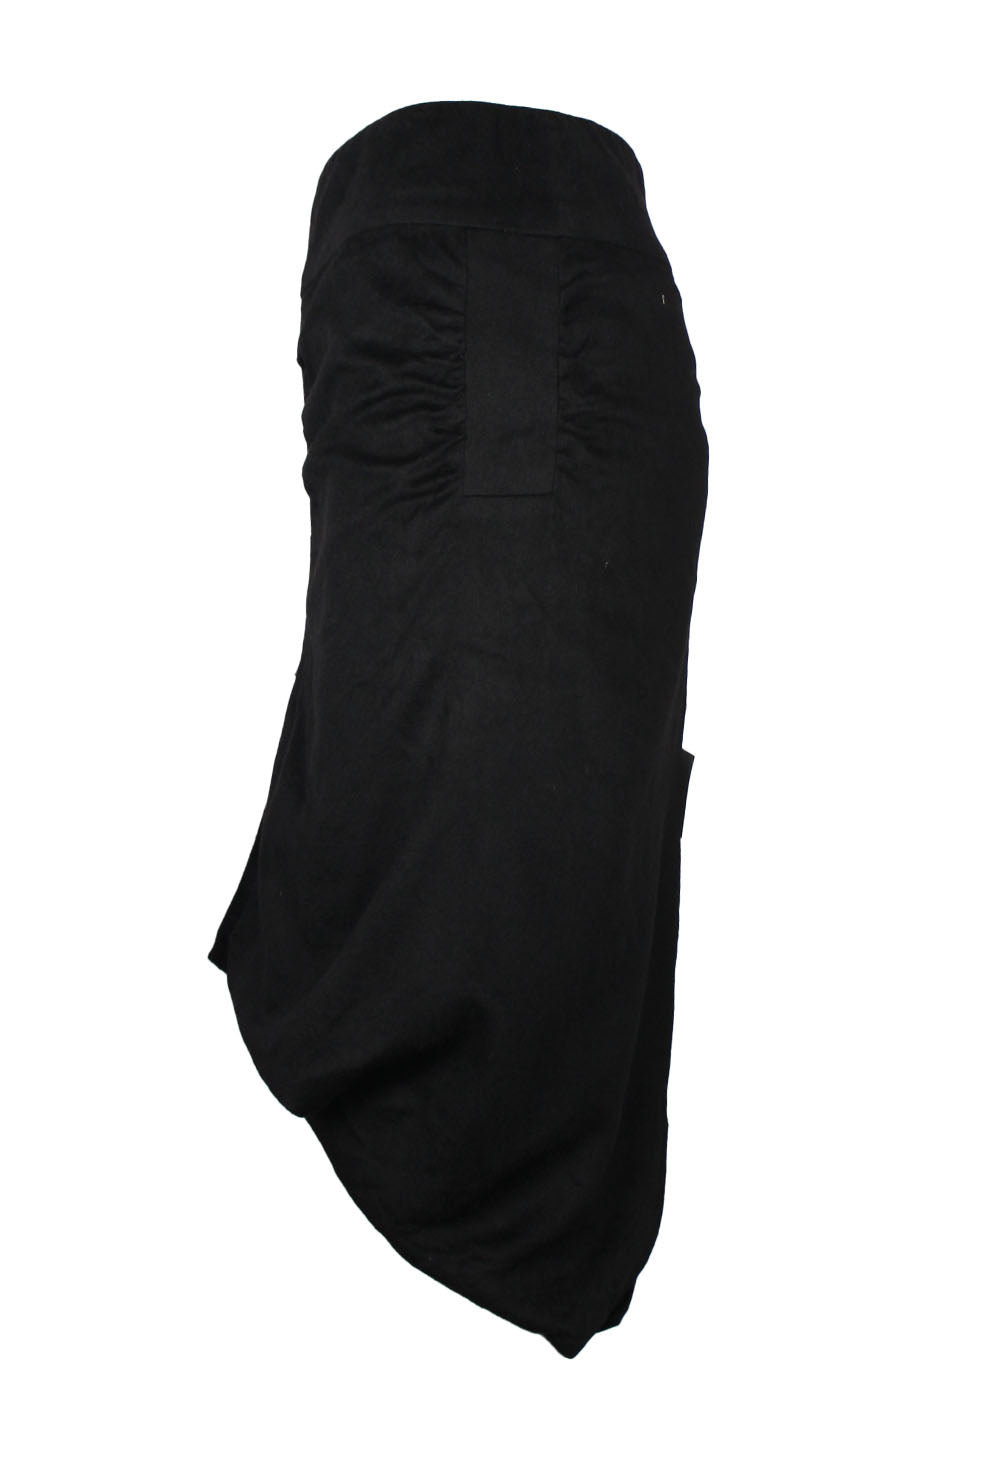 loewe black high-low skirt. features panel design with wrap detail, open slits at front and back, zipper closure at center back and fitted waist skirt. 